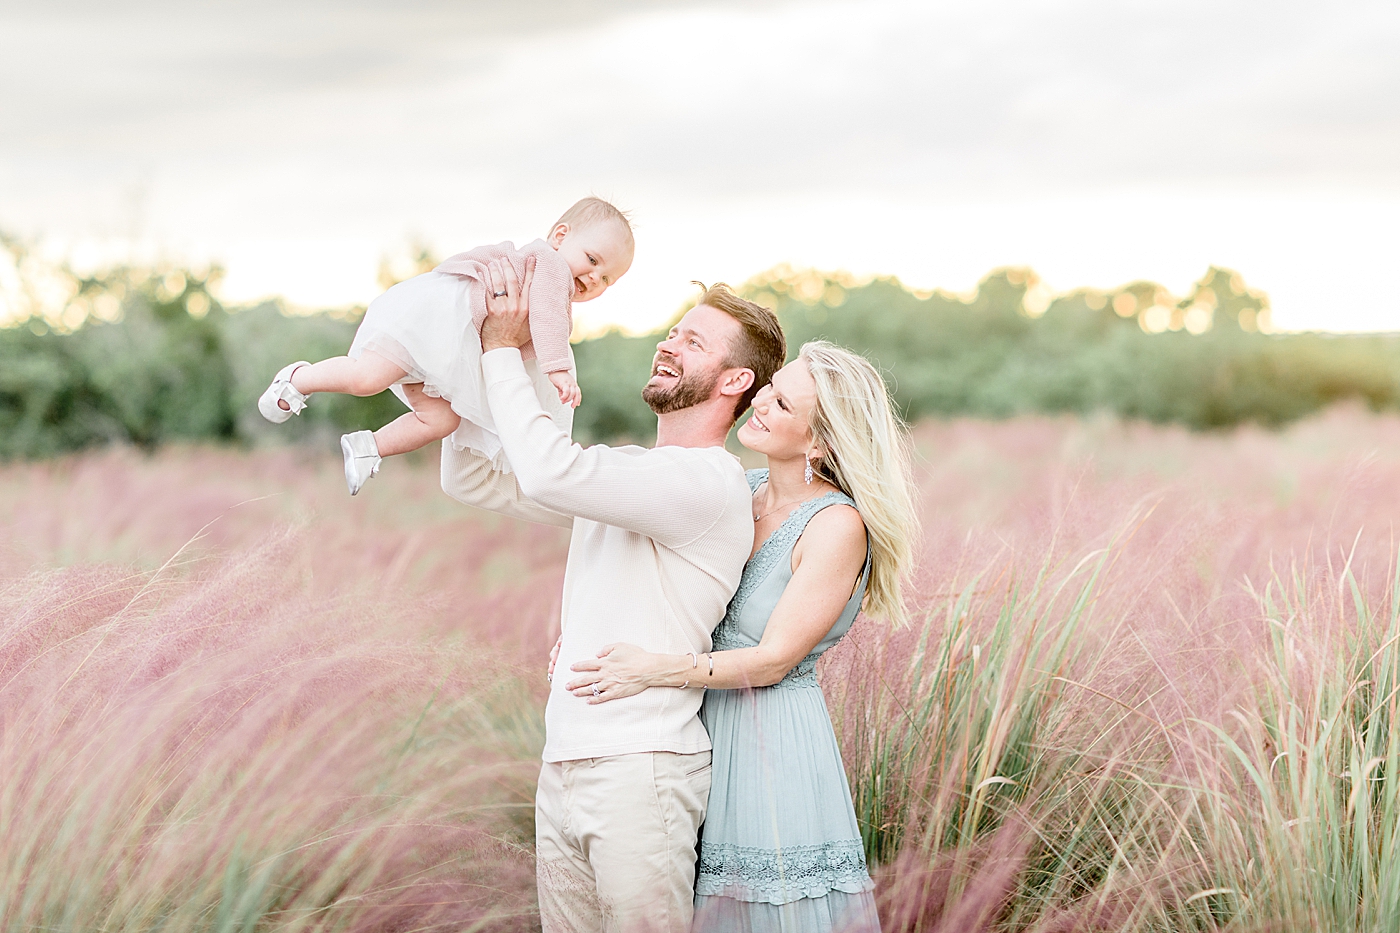 Outdoor family session in the tall grass in Tampa. Photo by Brittany Elise Photography.